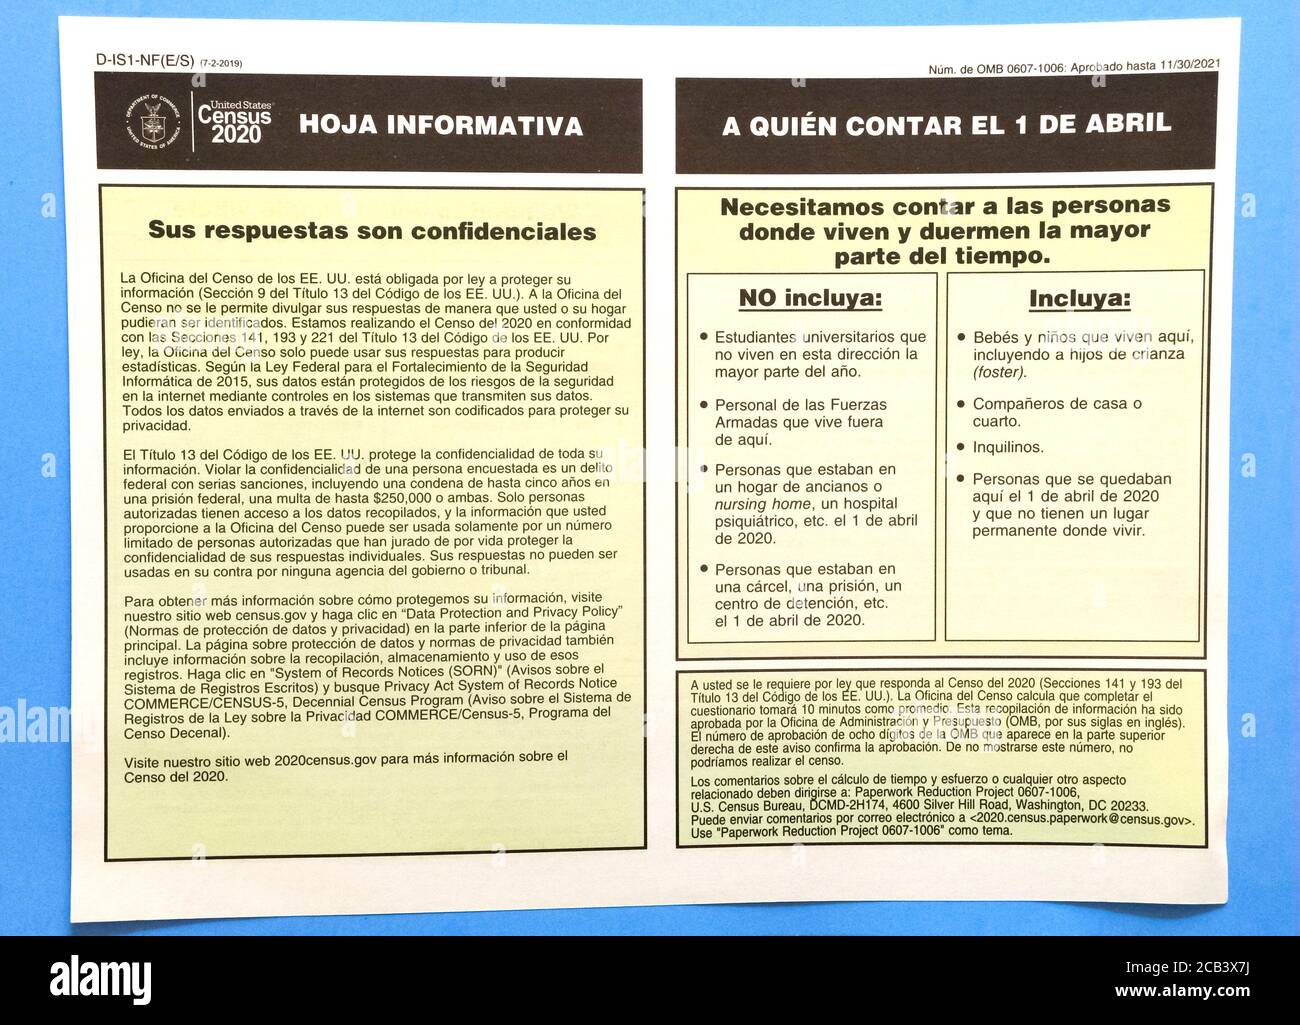 Enumerators (census takers) hand out an Information Sheet before asking specific questions and recording the answers from individuals who did not complete and return a 2020 U.S. Census questionnaire mailed to their homes. The sheet stresses that their answers are confidential, and lists who in the home is to be counted. One side of the sheet is in Spanish, the other in English. The nationwide population survey has been taken every 10 years since 1790, as mandated by the United States Constitution. Temporary employees of the U.S. Census Bureau spend about 10 minutes at each home to get the info Stock Photo